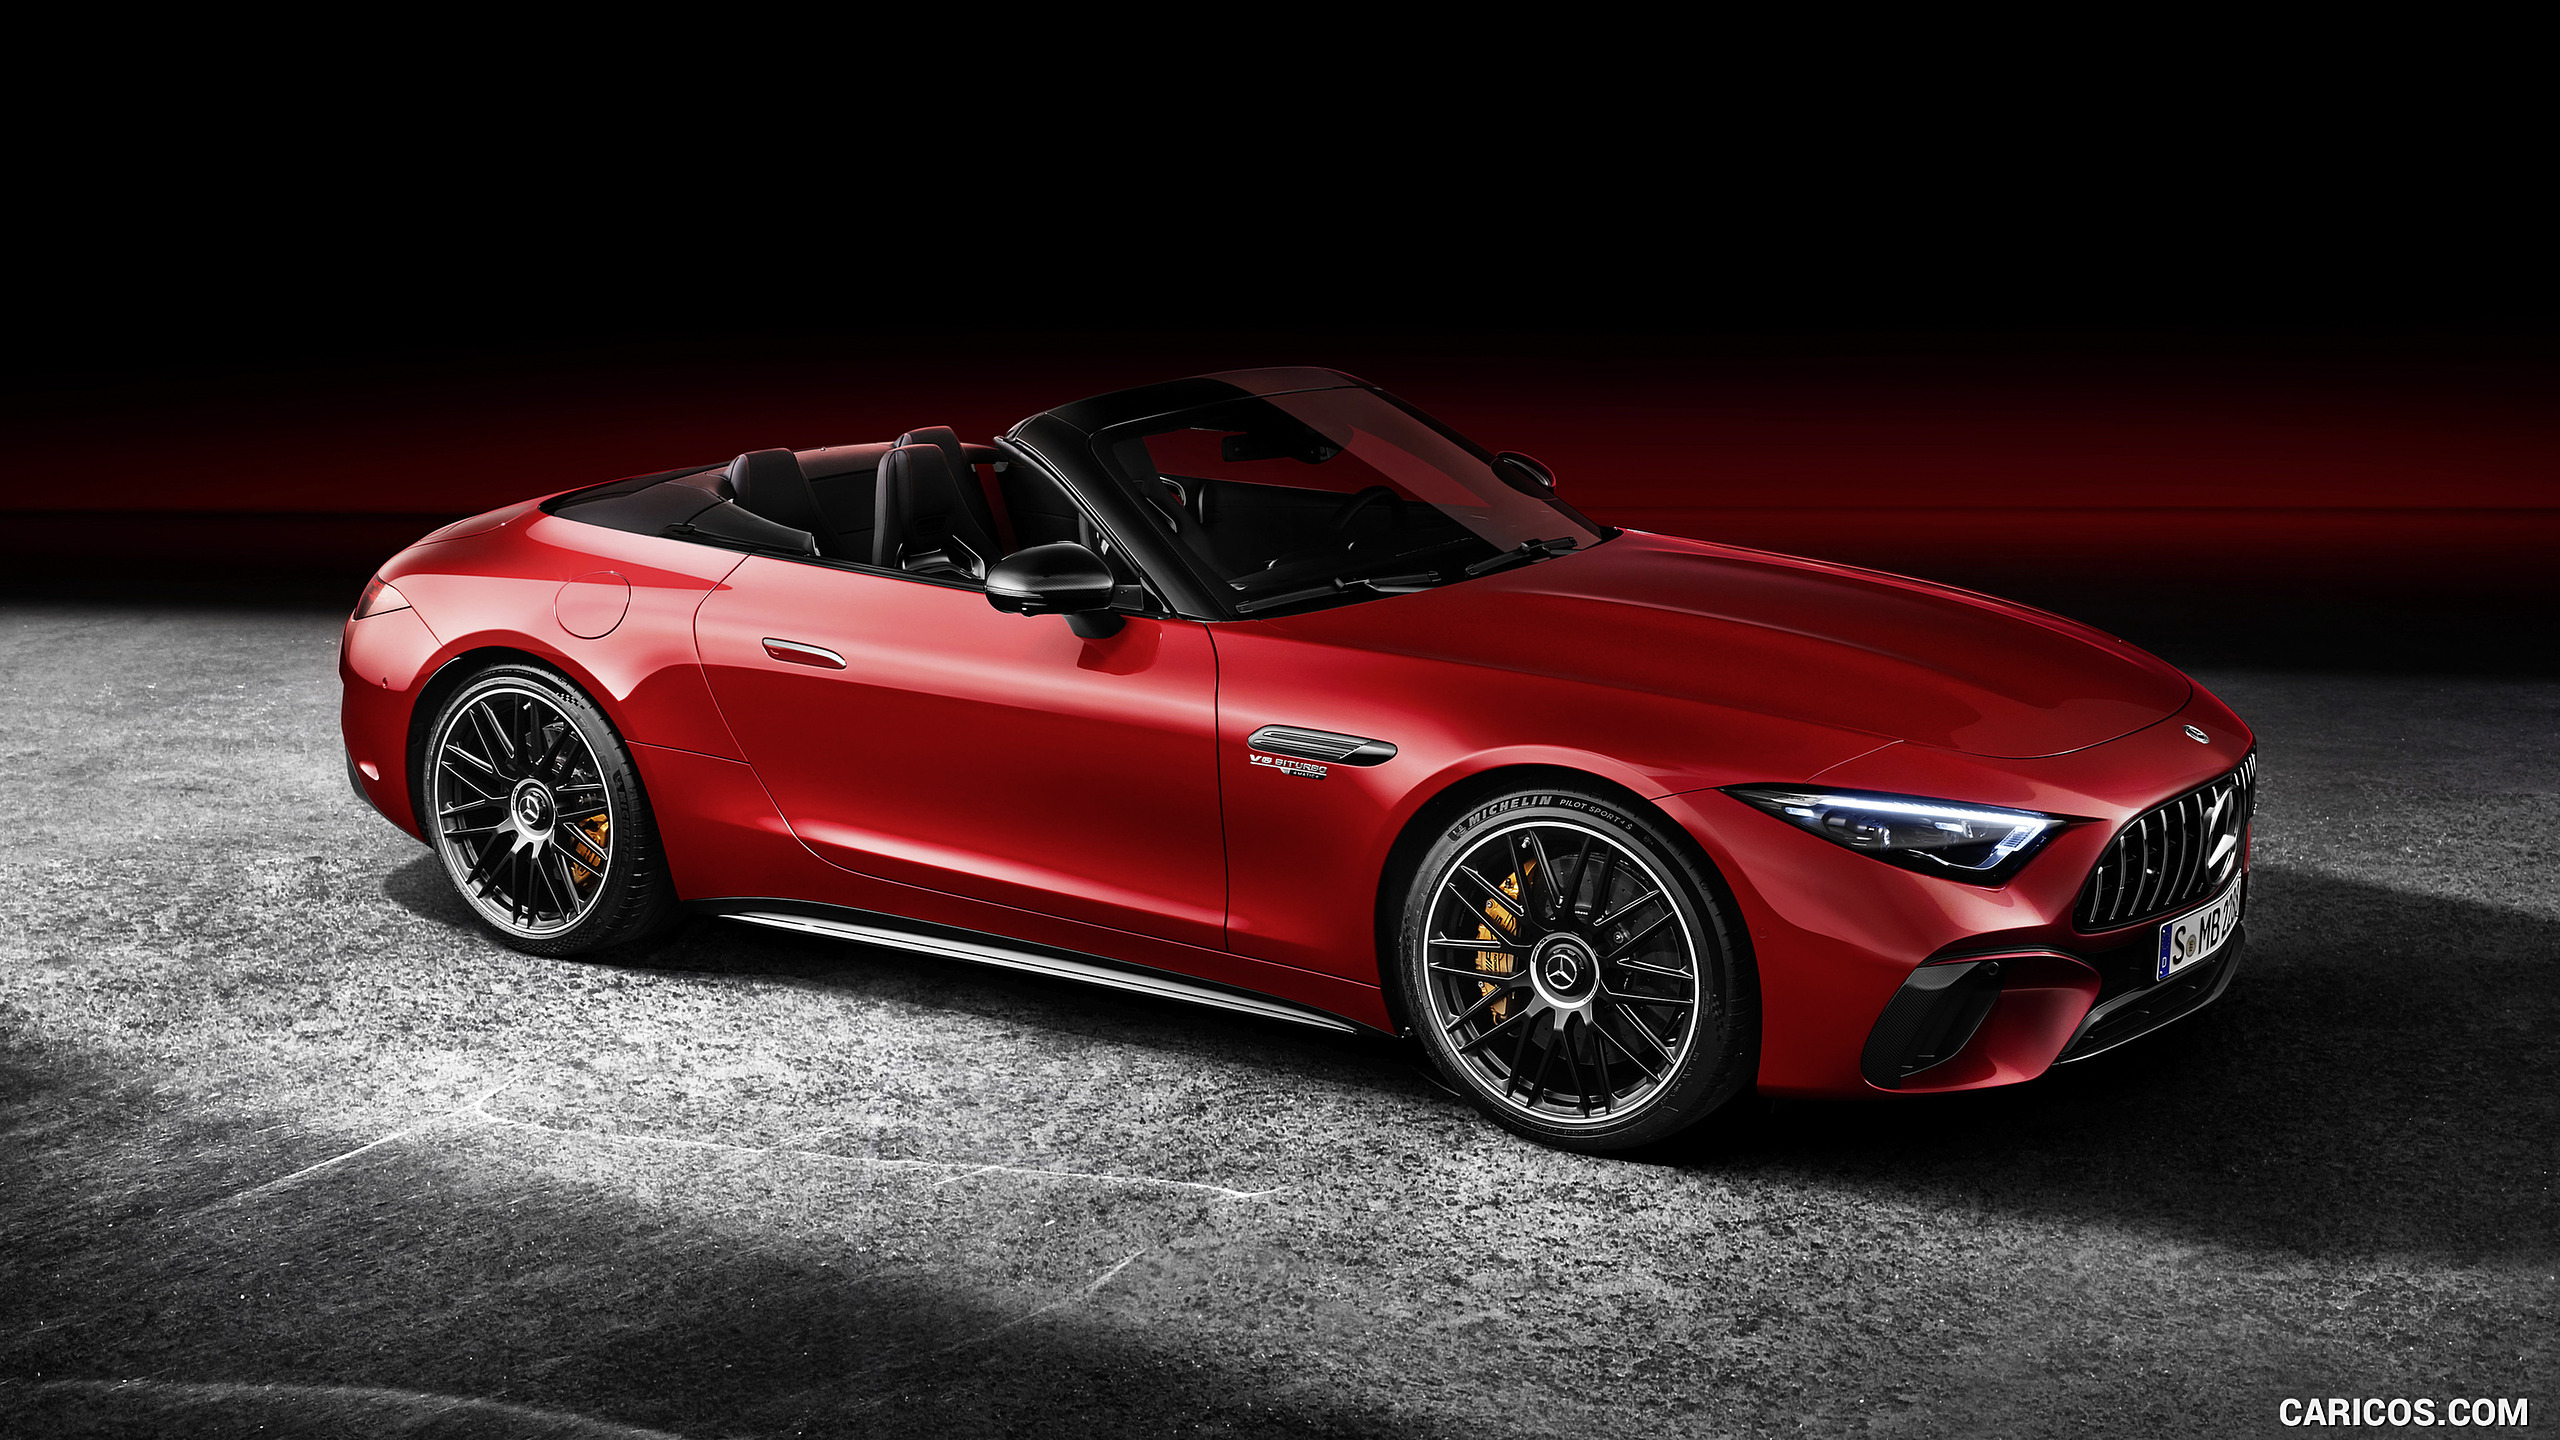 2022 Mercedes-AMG SL 63 4MATIC+ (Color: Patagonia Red Metallic) - Front Three-Quarter, #37 of 235